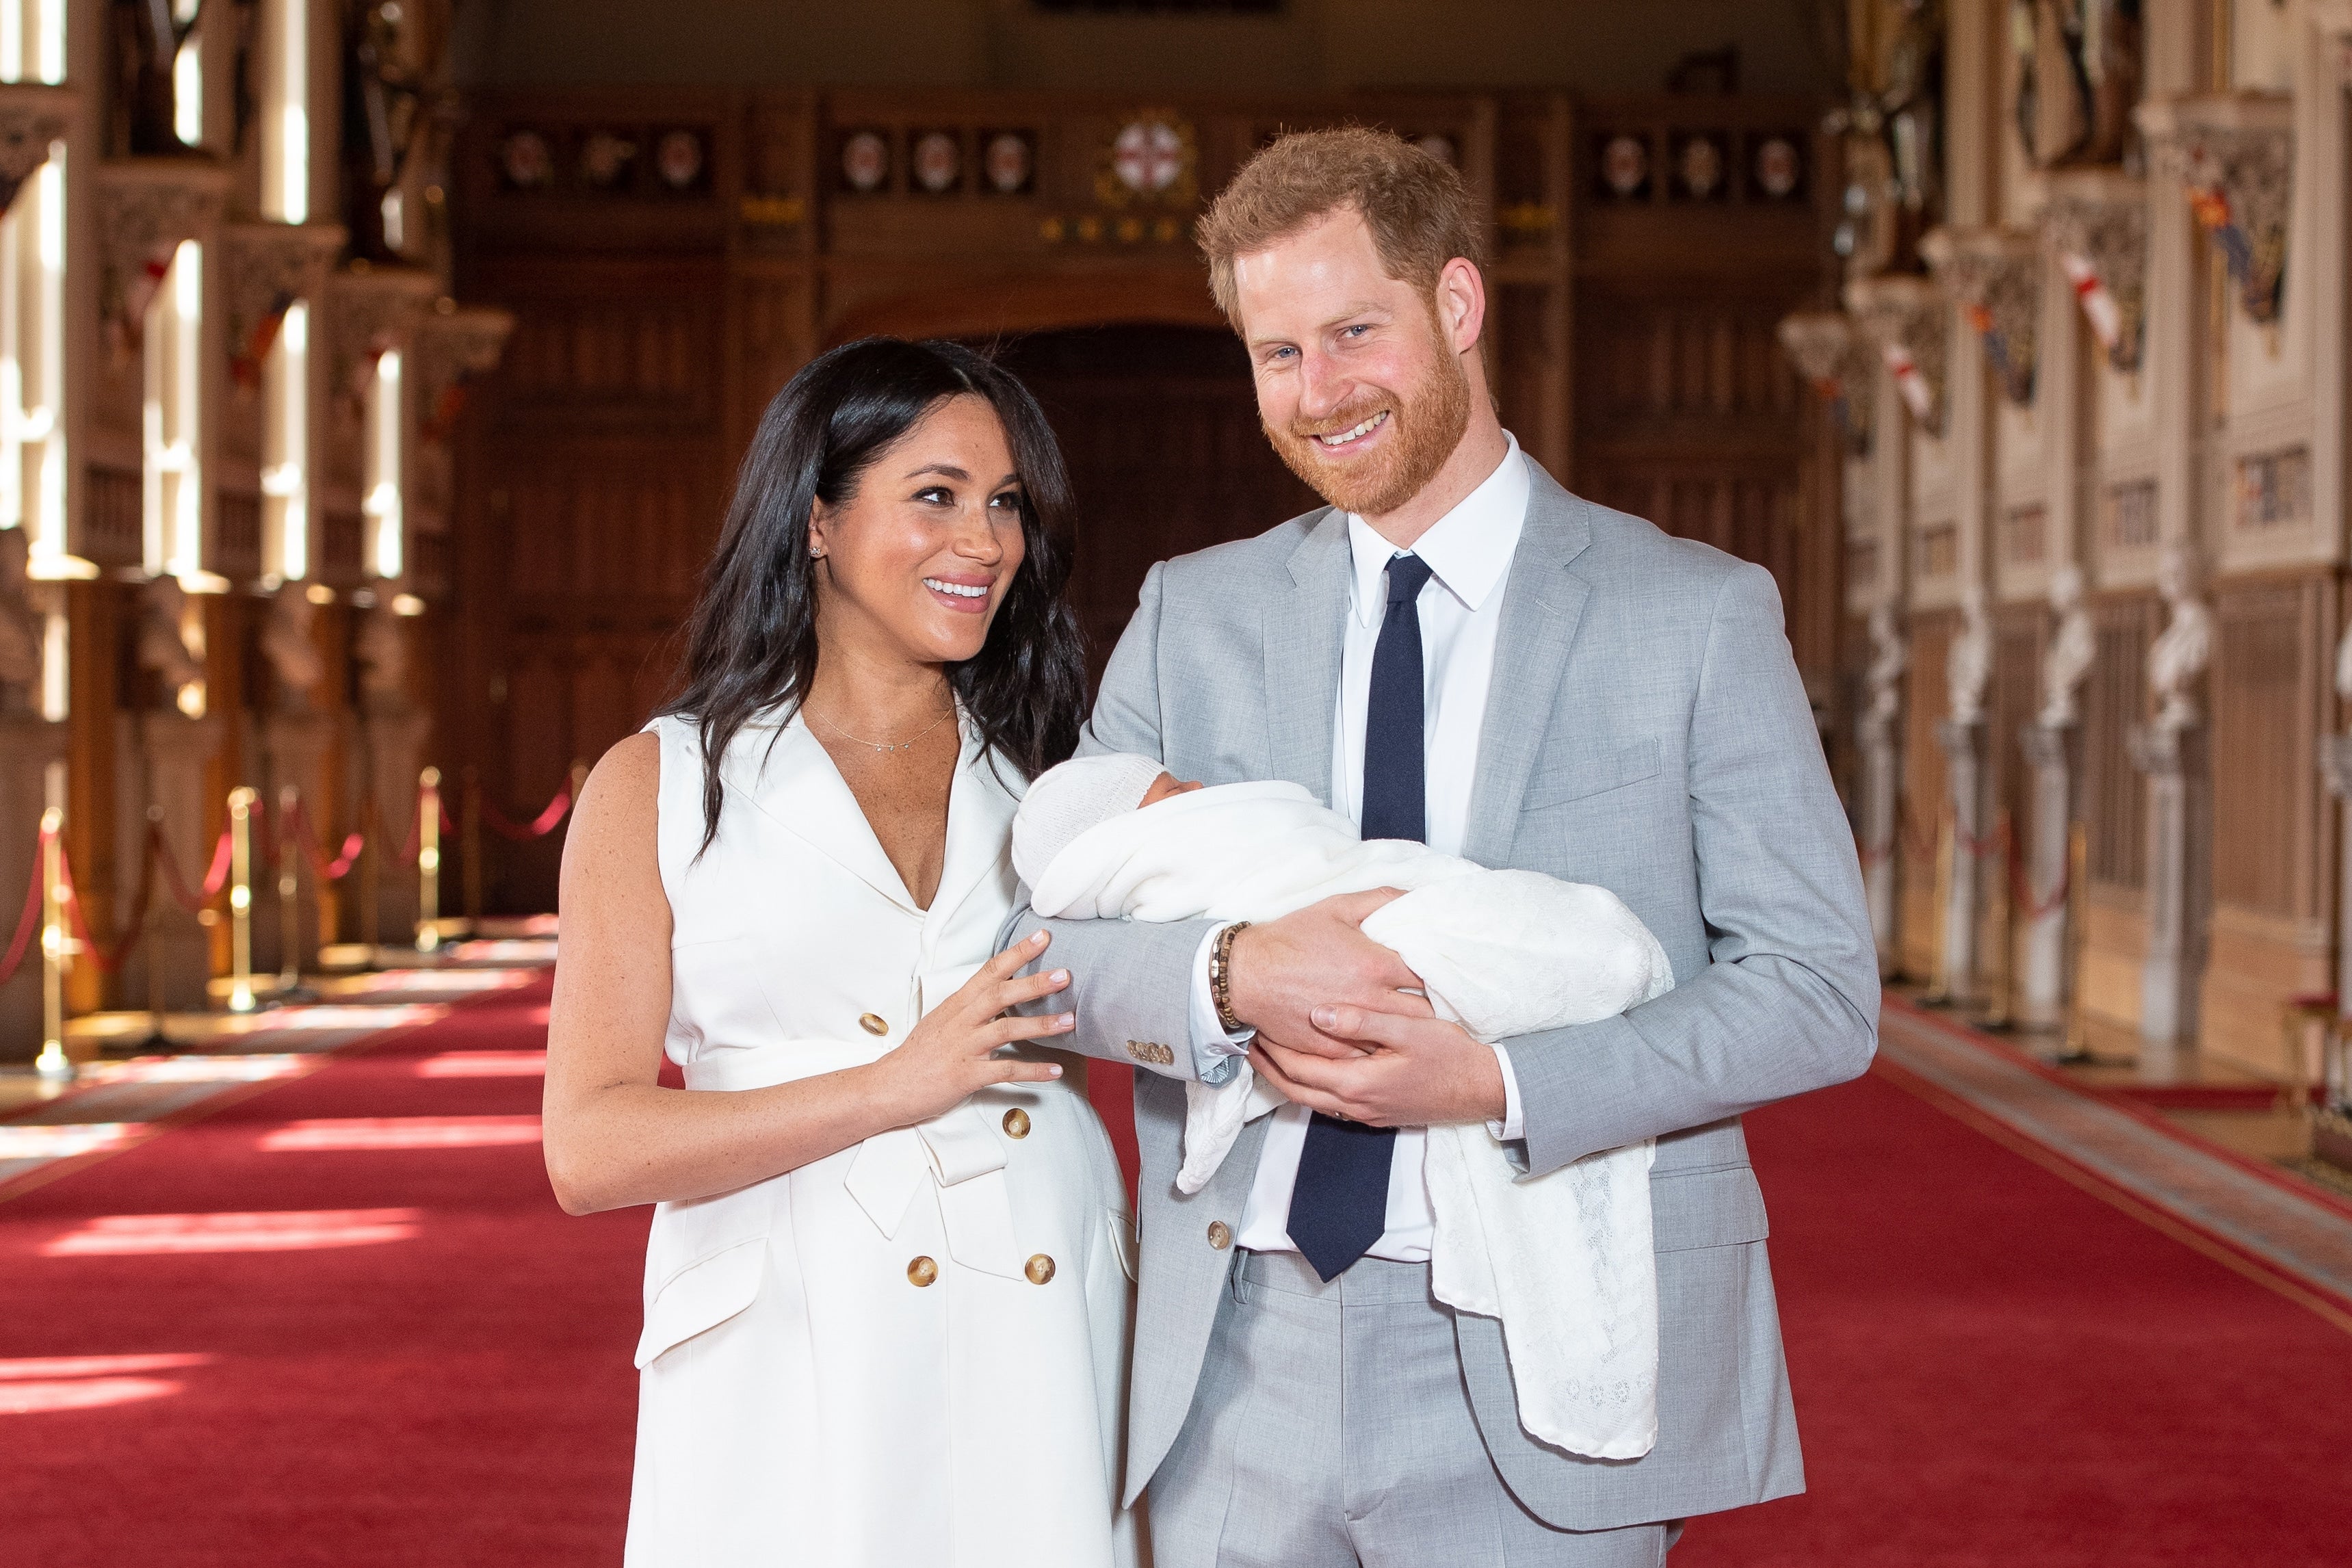 He's Here! Prince Harry and Meghan Markle Debut Their Baby Boy